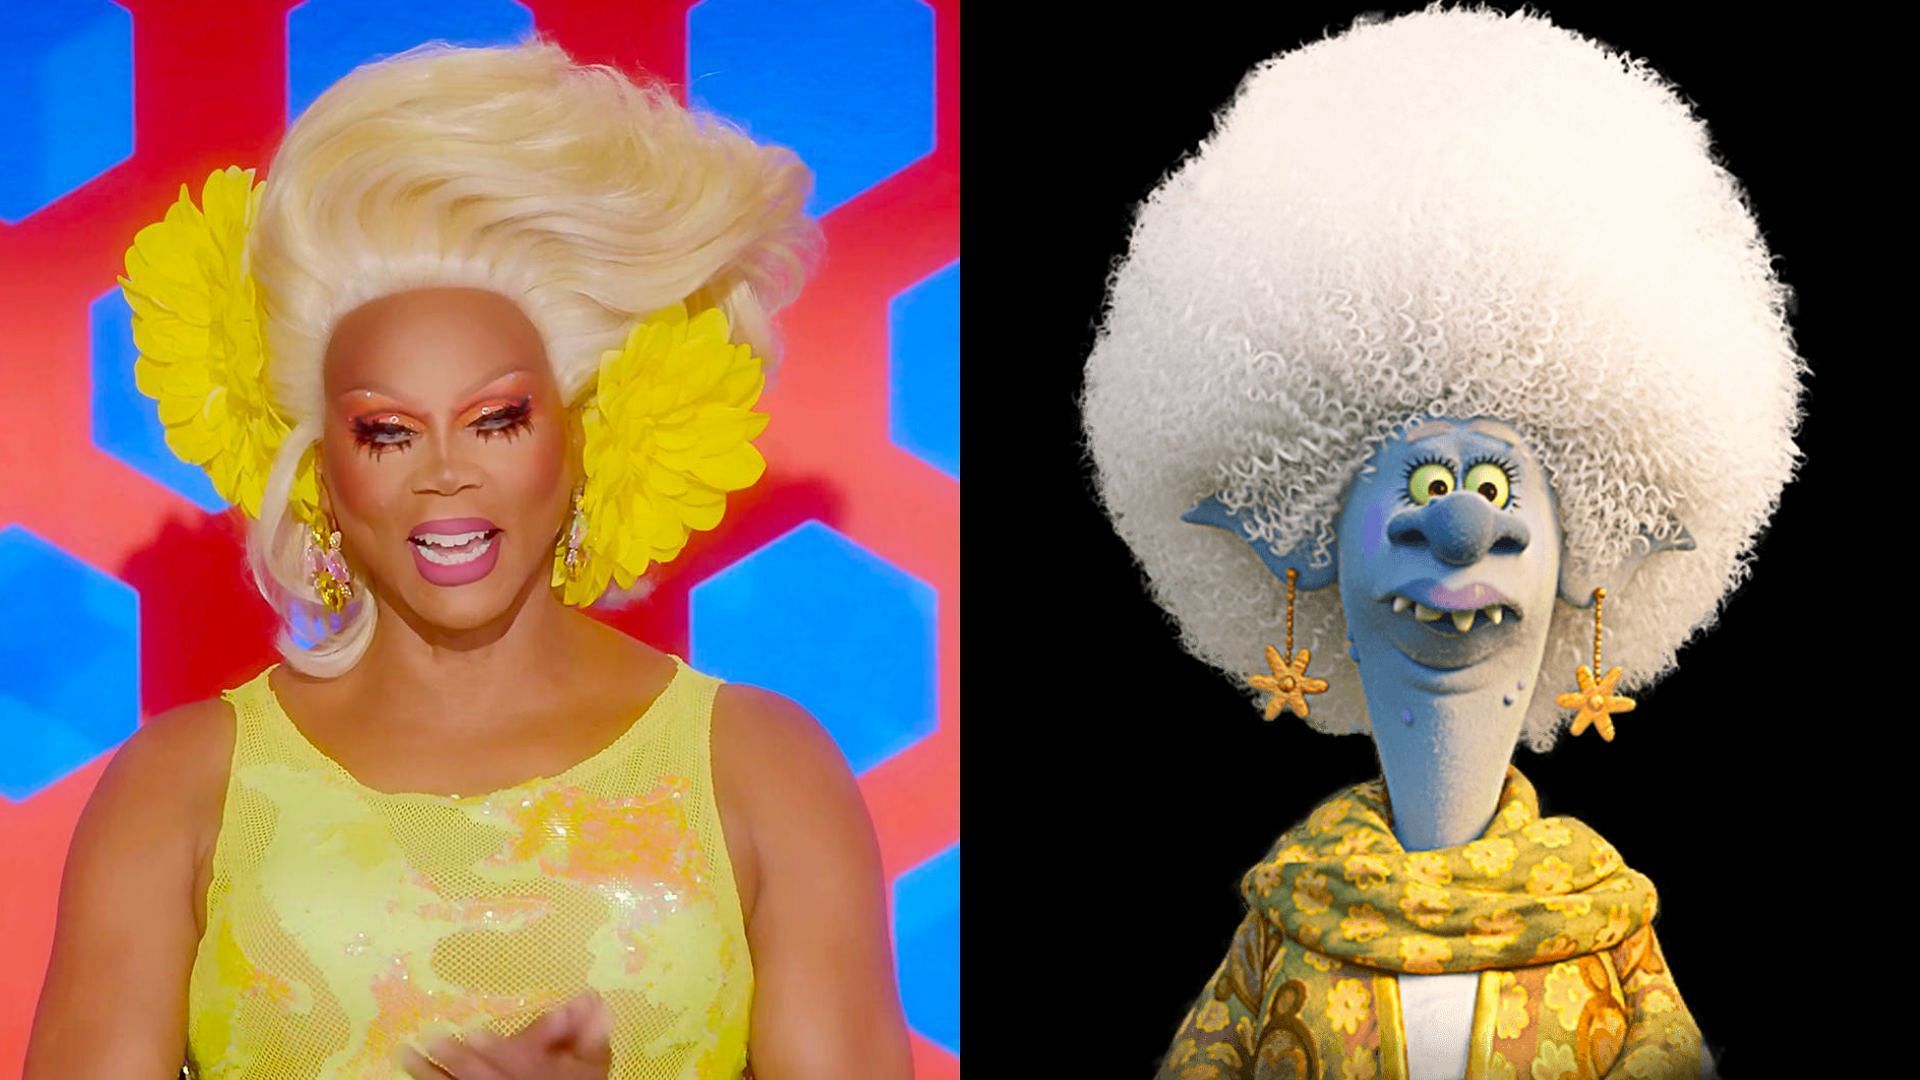 RuPaul (L) voices Miss Maxine (R) in this animated film (Image via IMDb and DreamWorks)